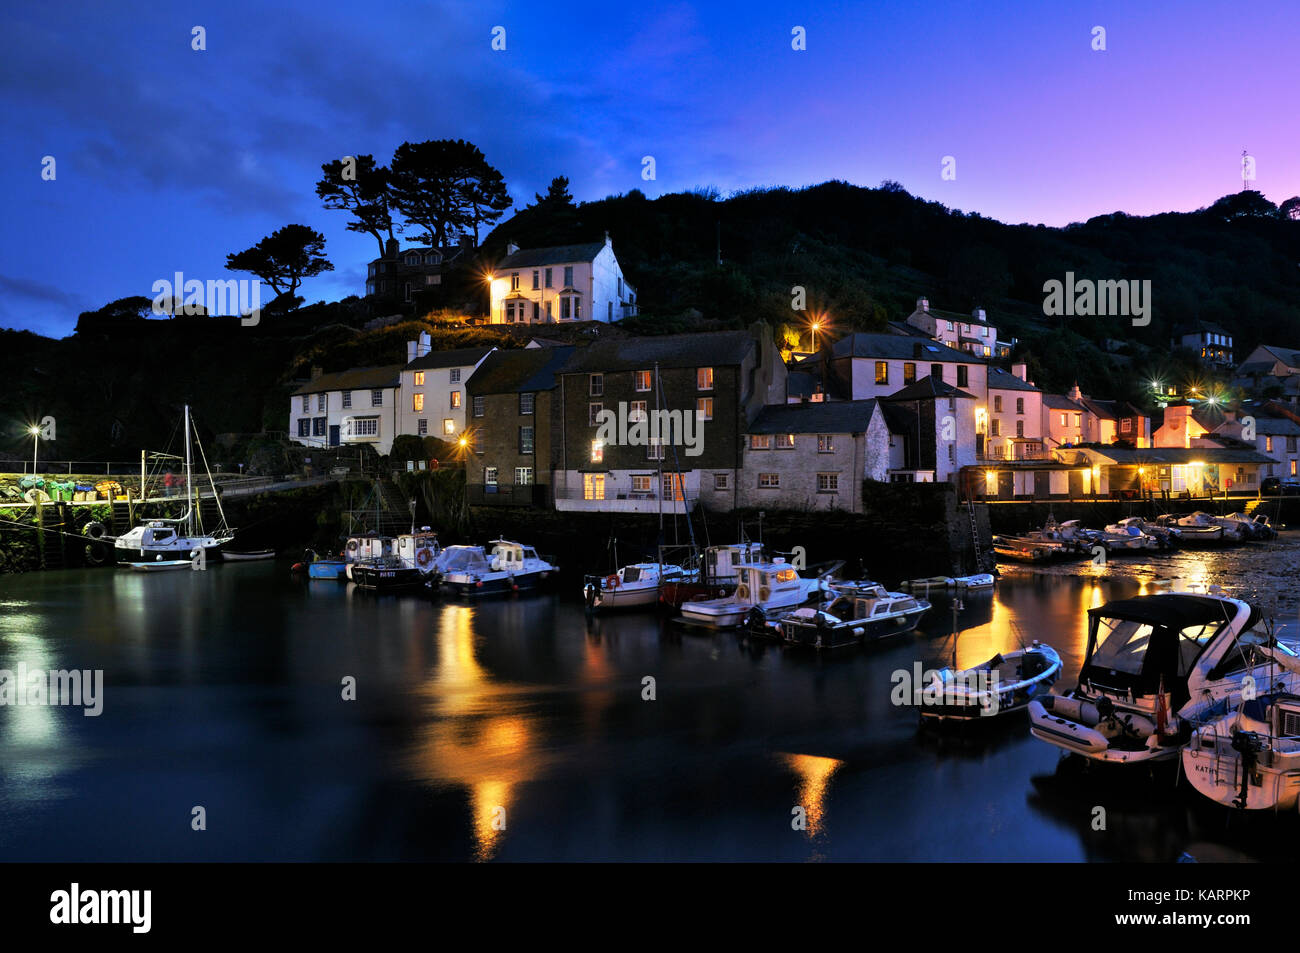 Polperro, Cornwall. Unfailingly busy on summer days, the sleepy Cornish fishing village returns to an atmospheric calm at twilight... Stock Photo